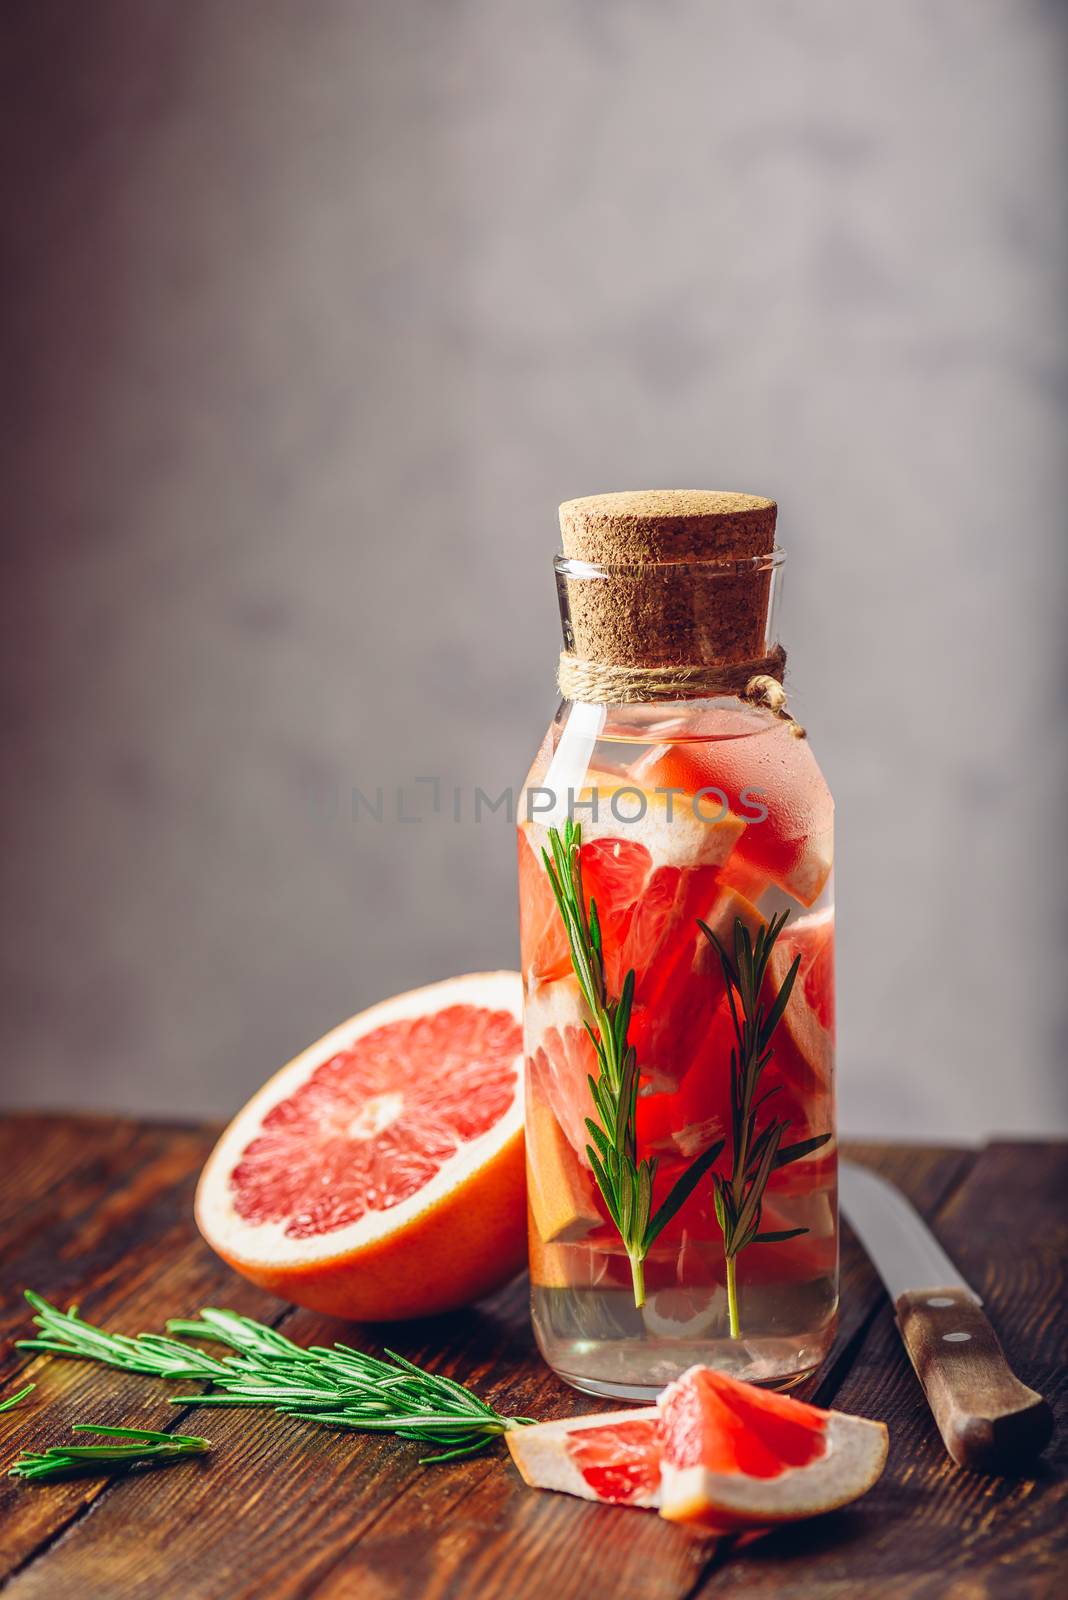 Bottle of Water Infused with Sliced Raw Grapefruit and Fresh Springs of Rosemary. Vertical Orientation. Copy Space on the Top.